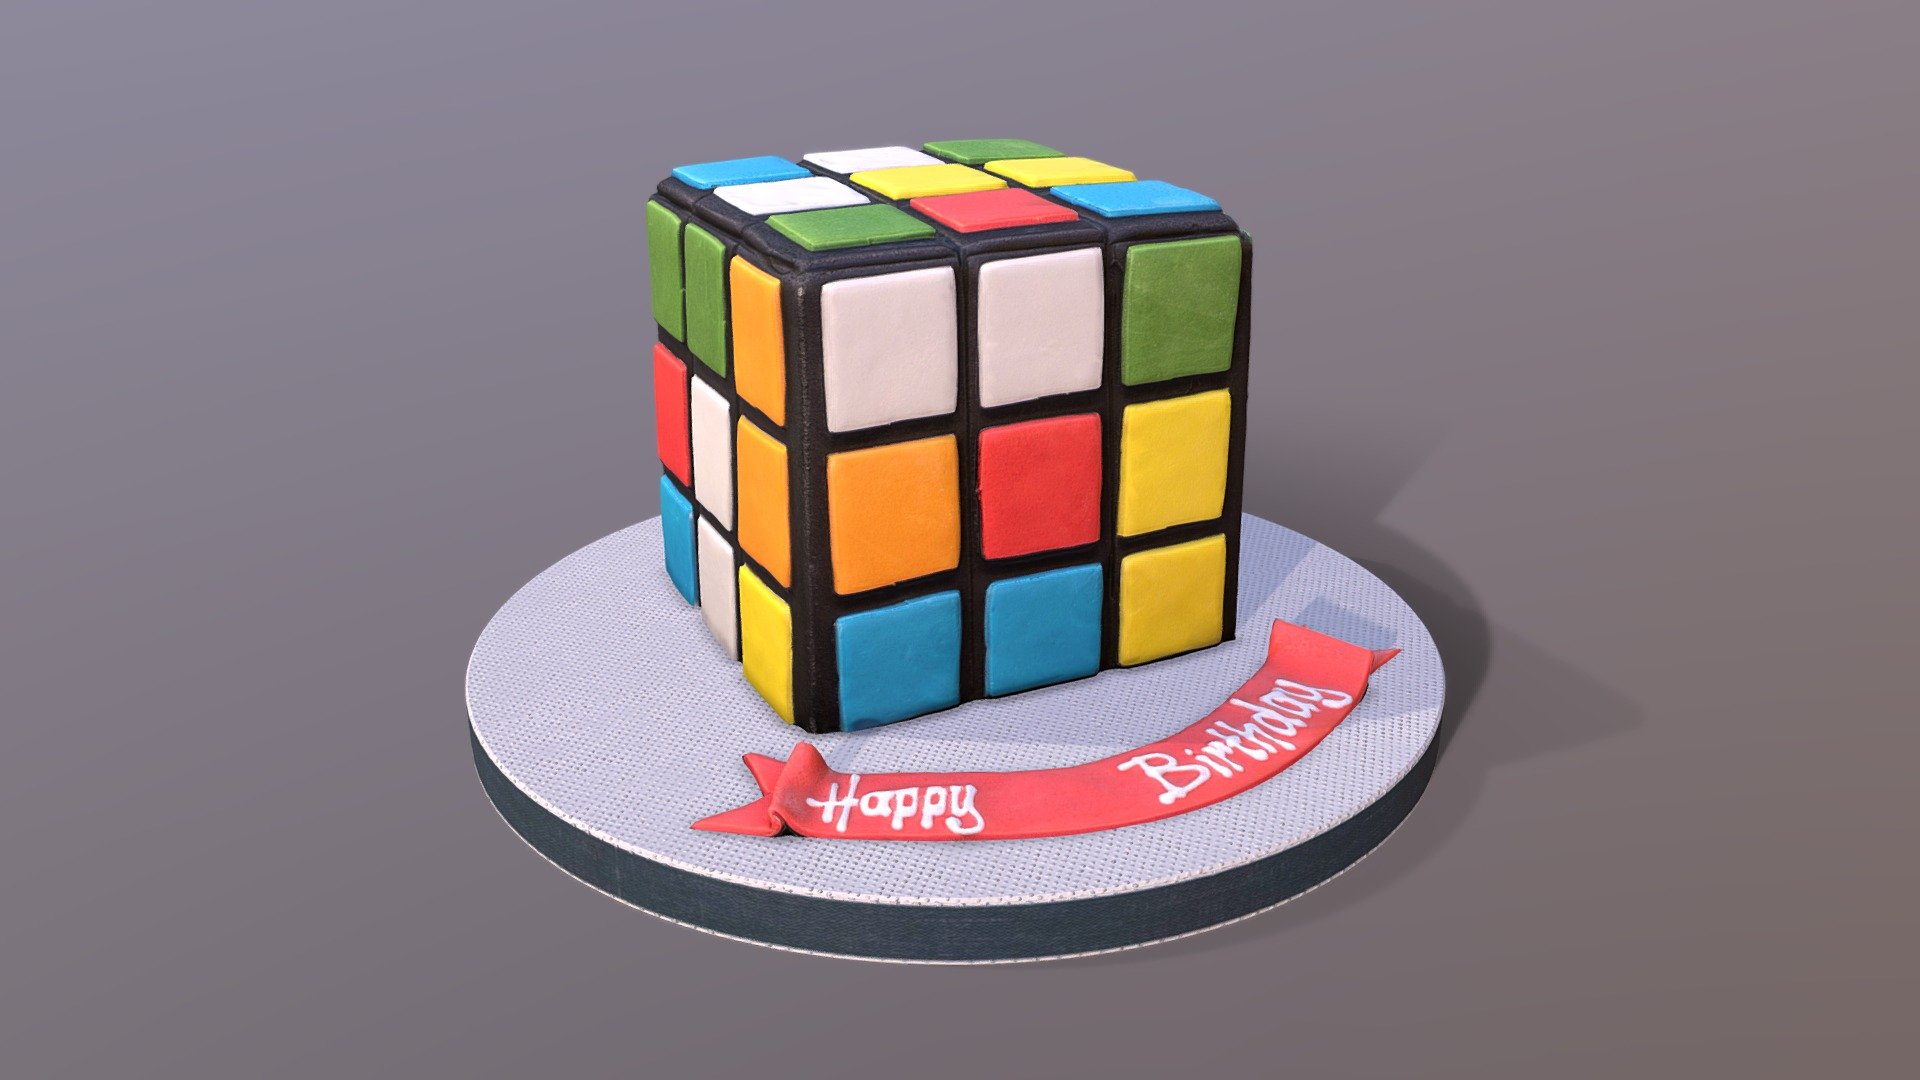 This legendery Rubik's Cube Cake model was created using photogrammetry which is made by CAKESBURG Premium Cake Shop in the UK. You can purchase real cake from this link: https://cakesburg.co.uk/products/rubic-cube-cake?_pos=1&amp;_sid=192f1fec4&amp;_ss=r

Textures 2X 4096*4096px PBR photoscan-based materials Base Color, Normal Map, Roughness) - Rubik's Cube Cake - Buy Royalty Free 3D model by Cakesburg Premium 3D Cake Shop (@Viscom_Cakesburg) 3d model